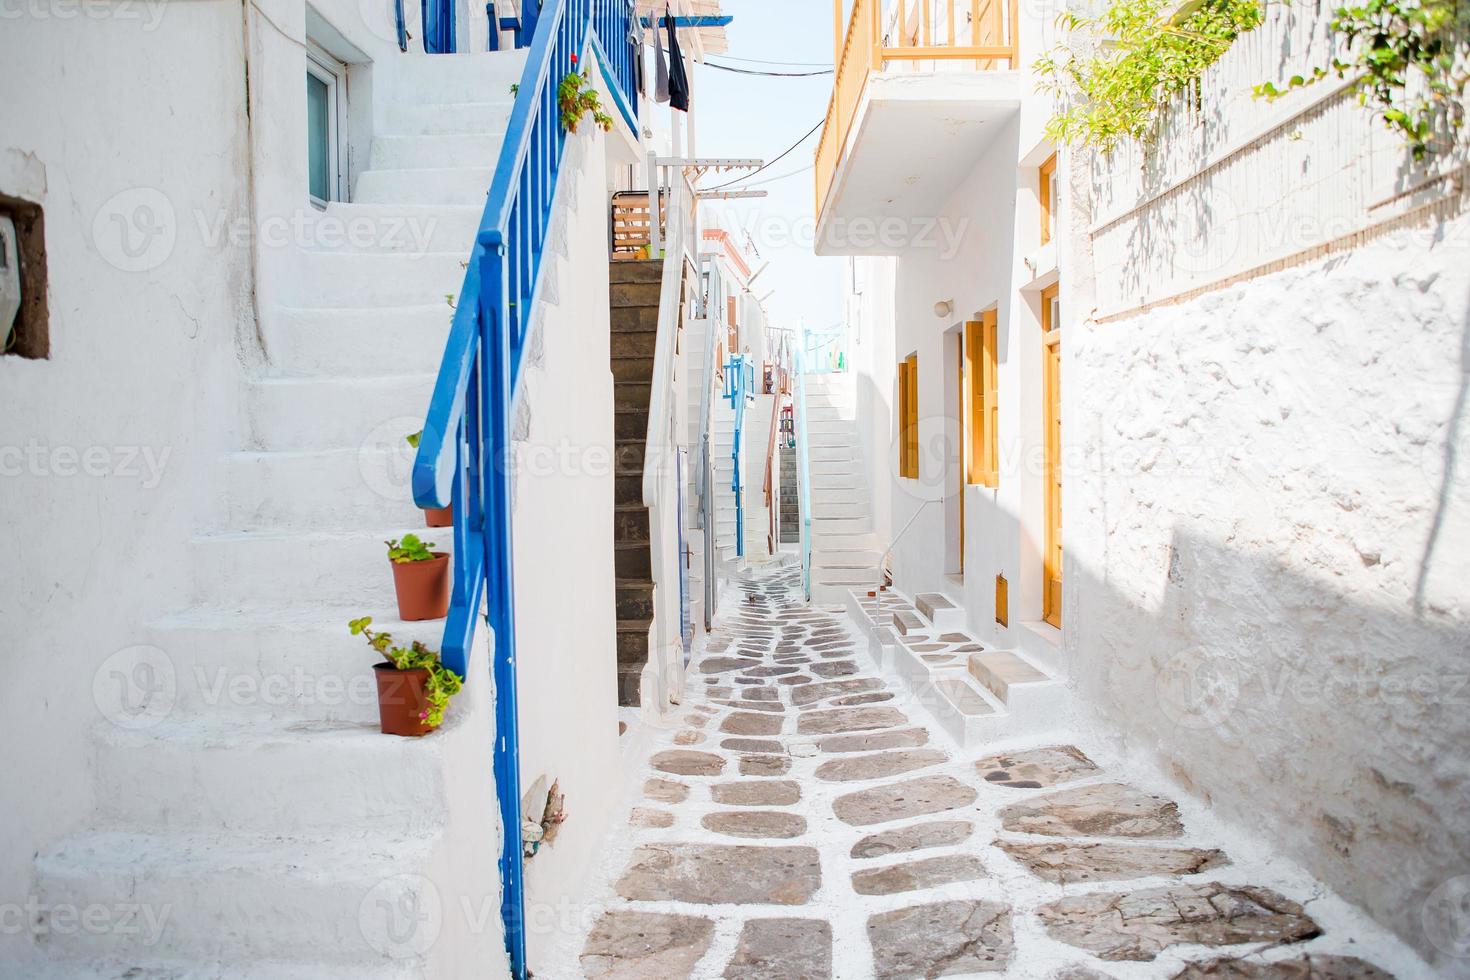 The narrow streets of the island with blue balconies, stairs and flowers. photo